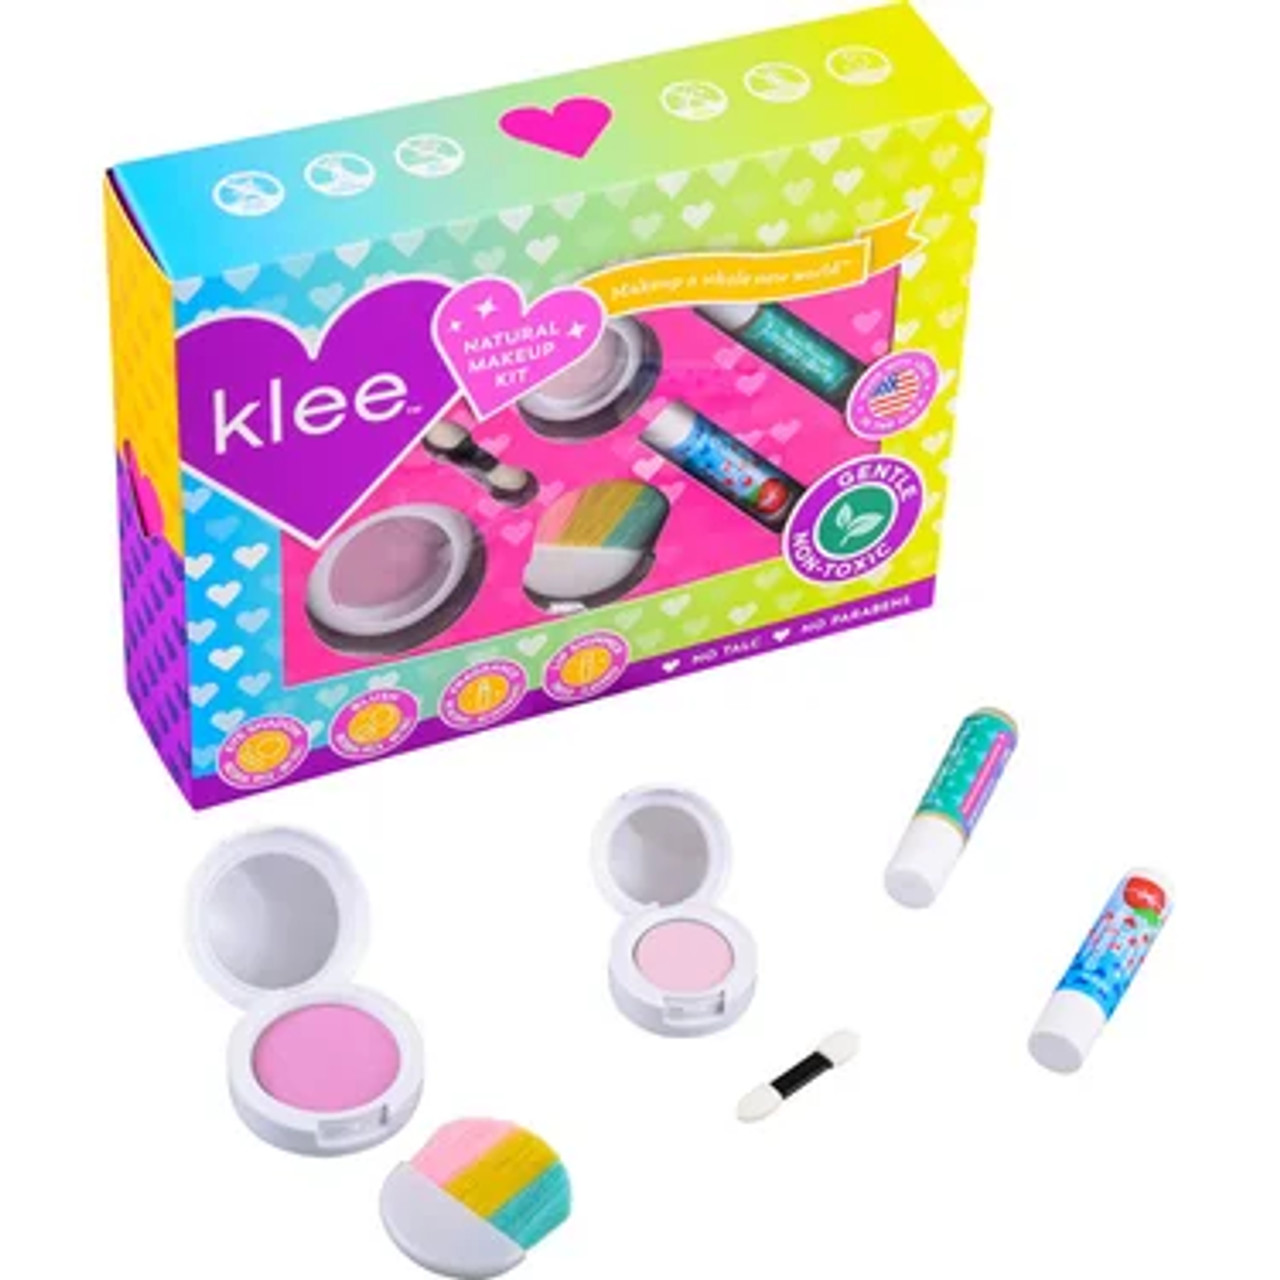 Sweet On You Klee Naturals 4 Piece Play Make Up Kit